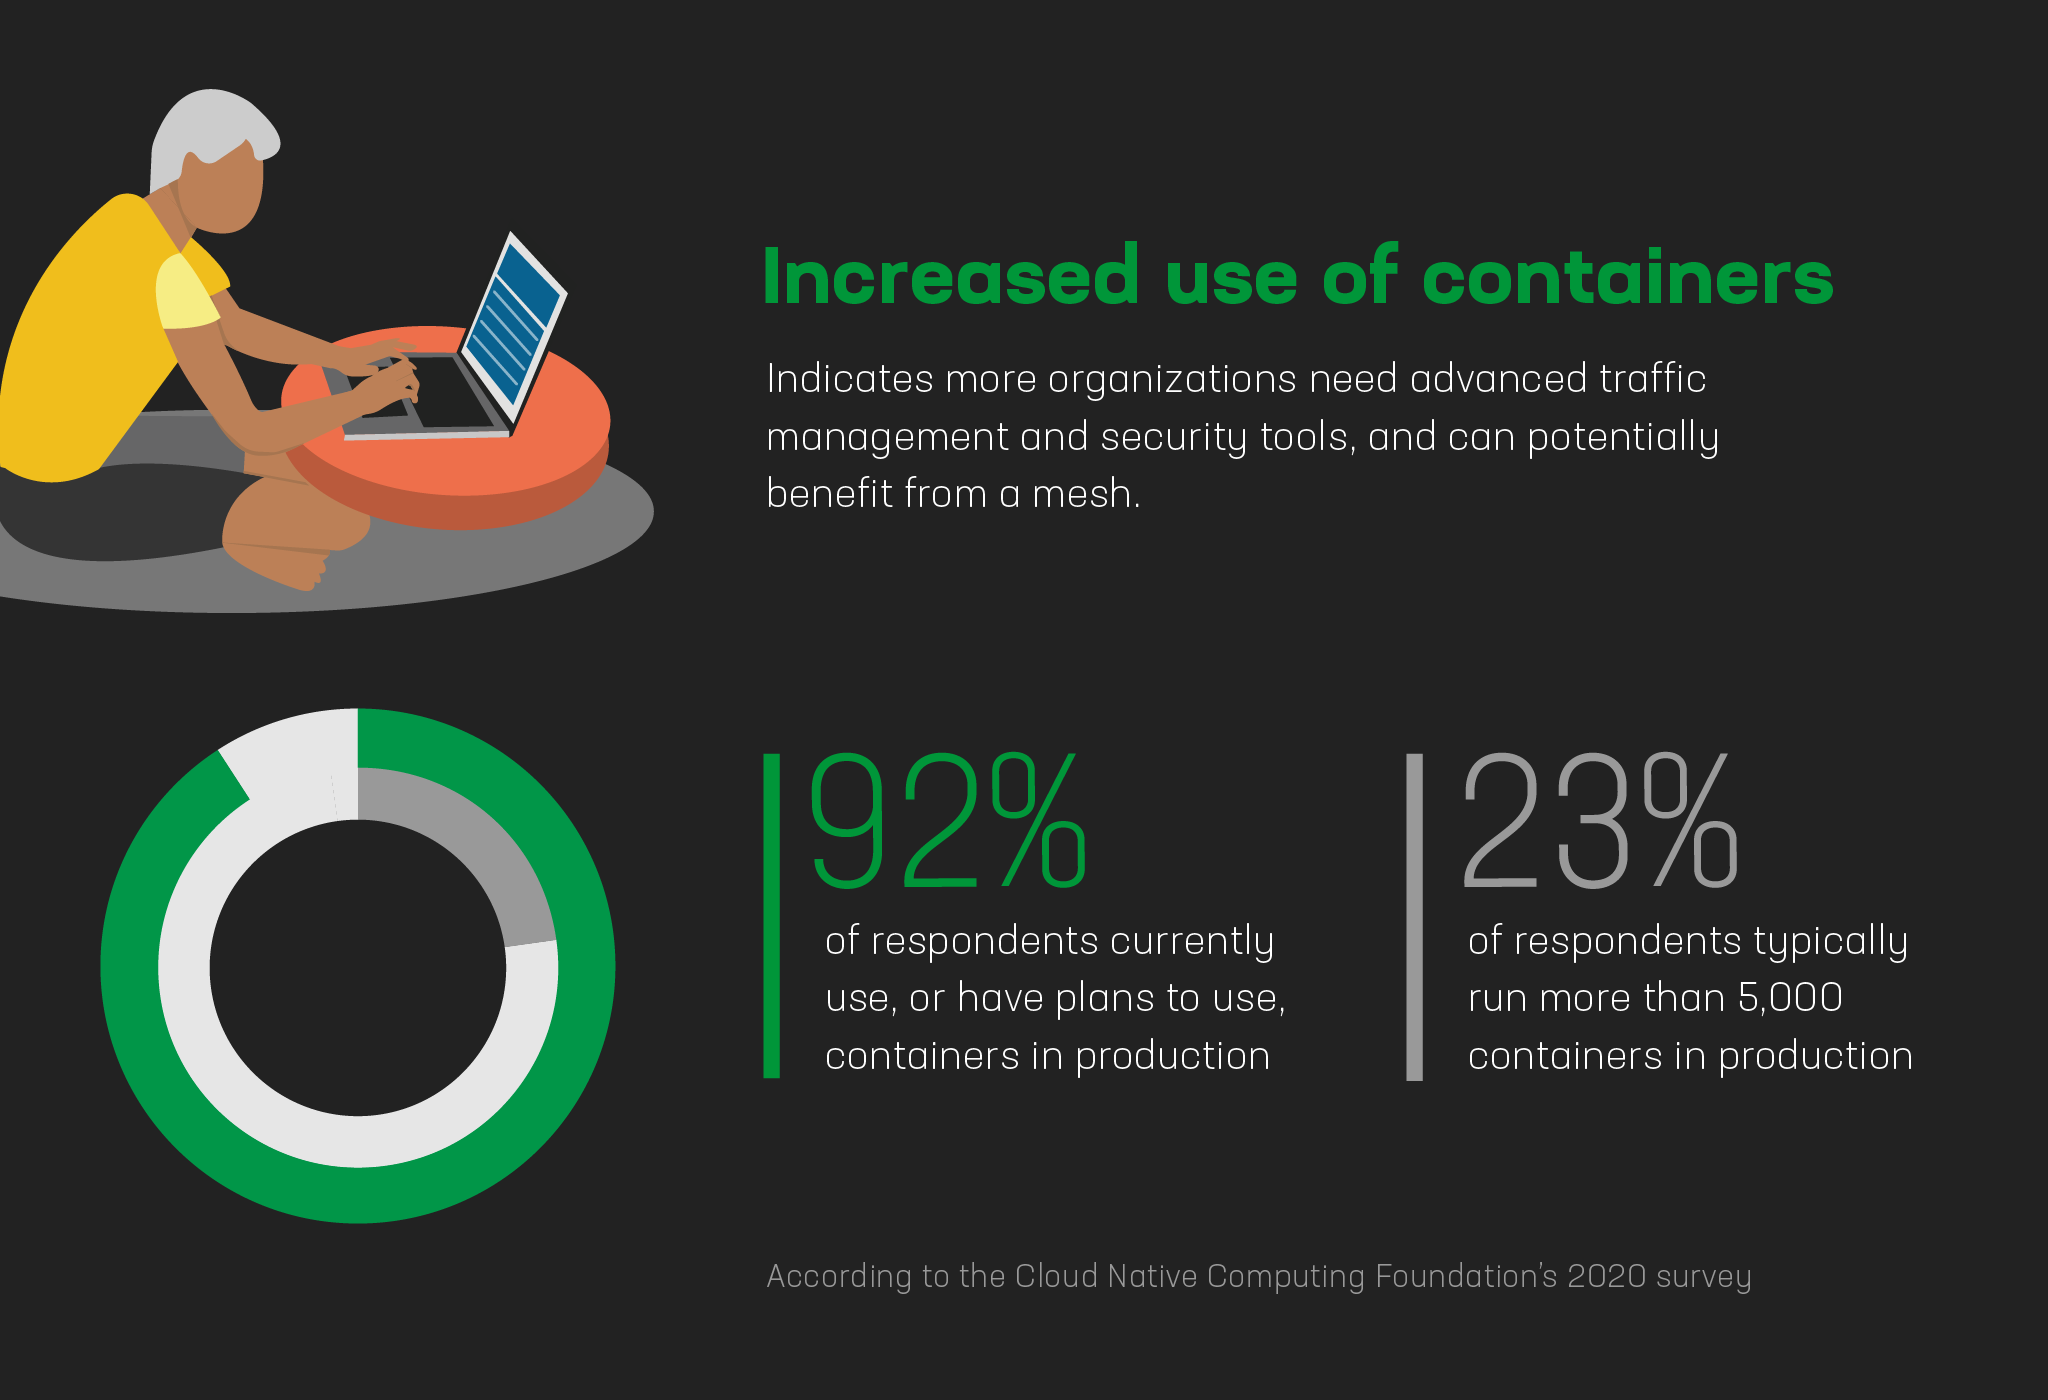 Graphic showing increased use of containers: 92% use or plan to use in production, 23% run more than 5,000 production containers